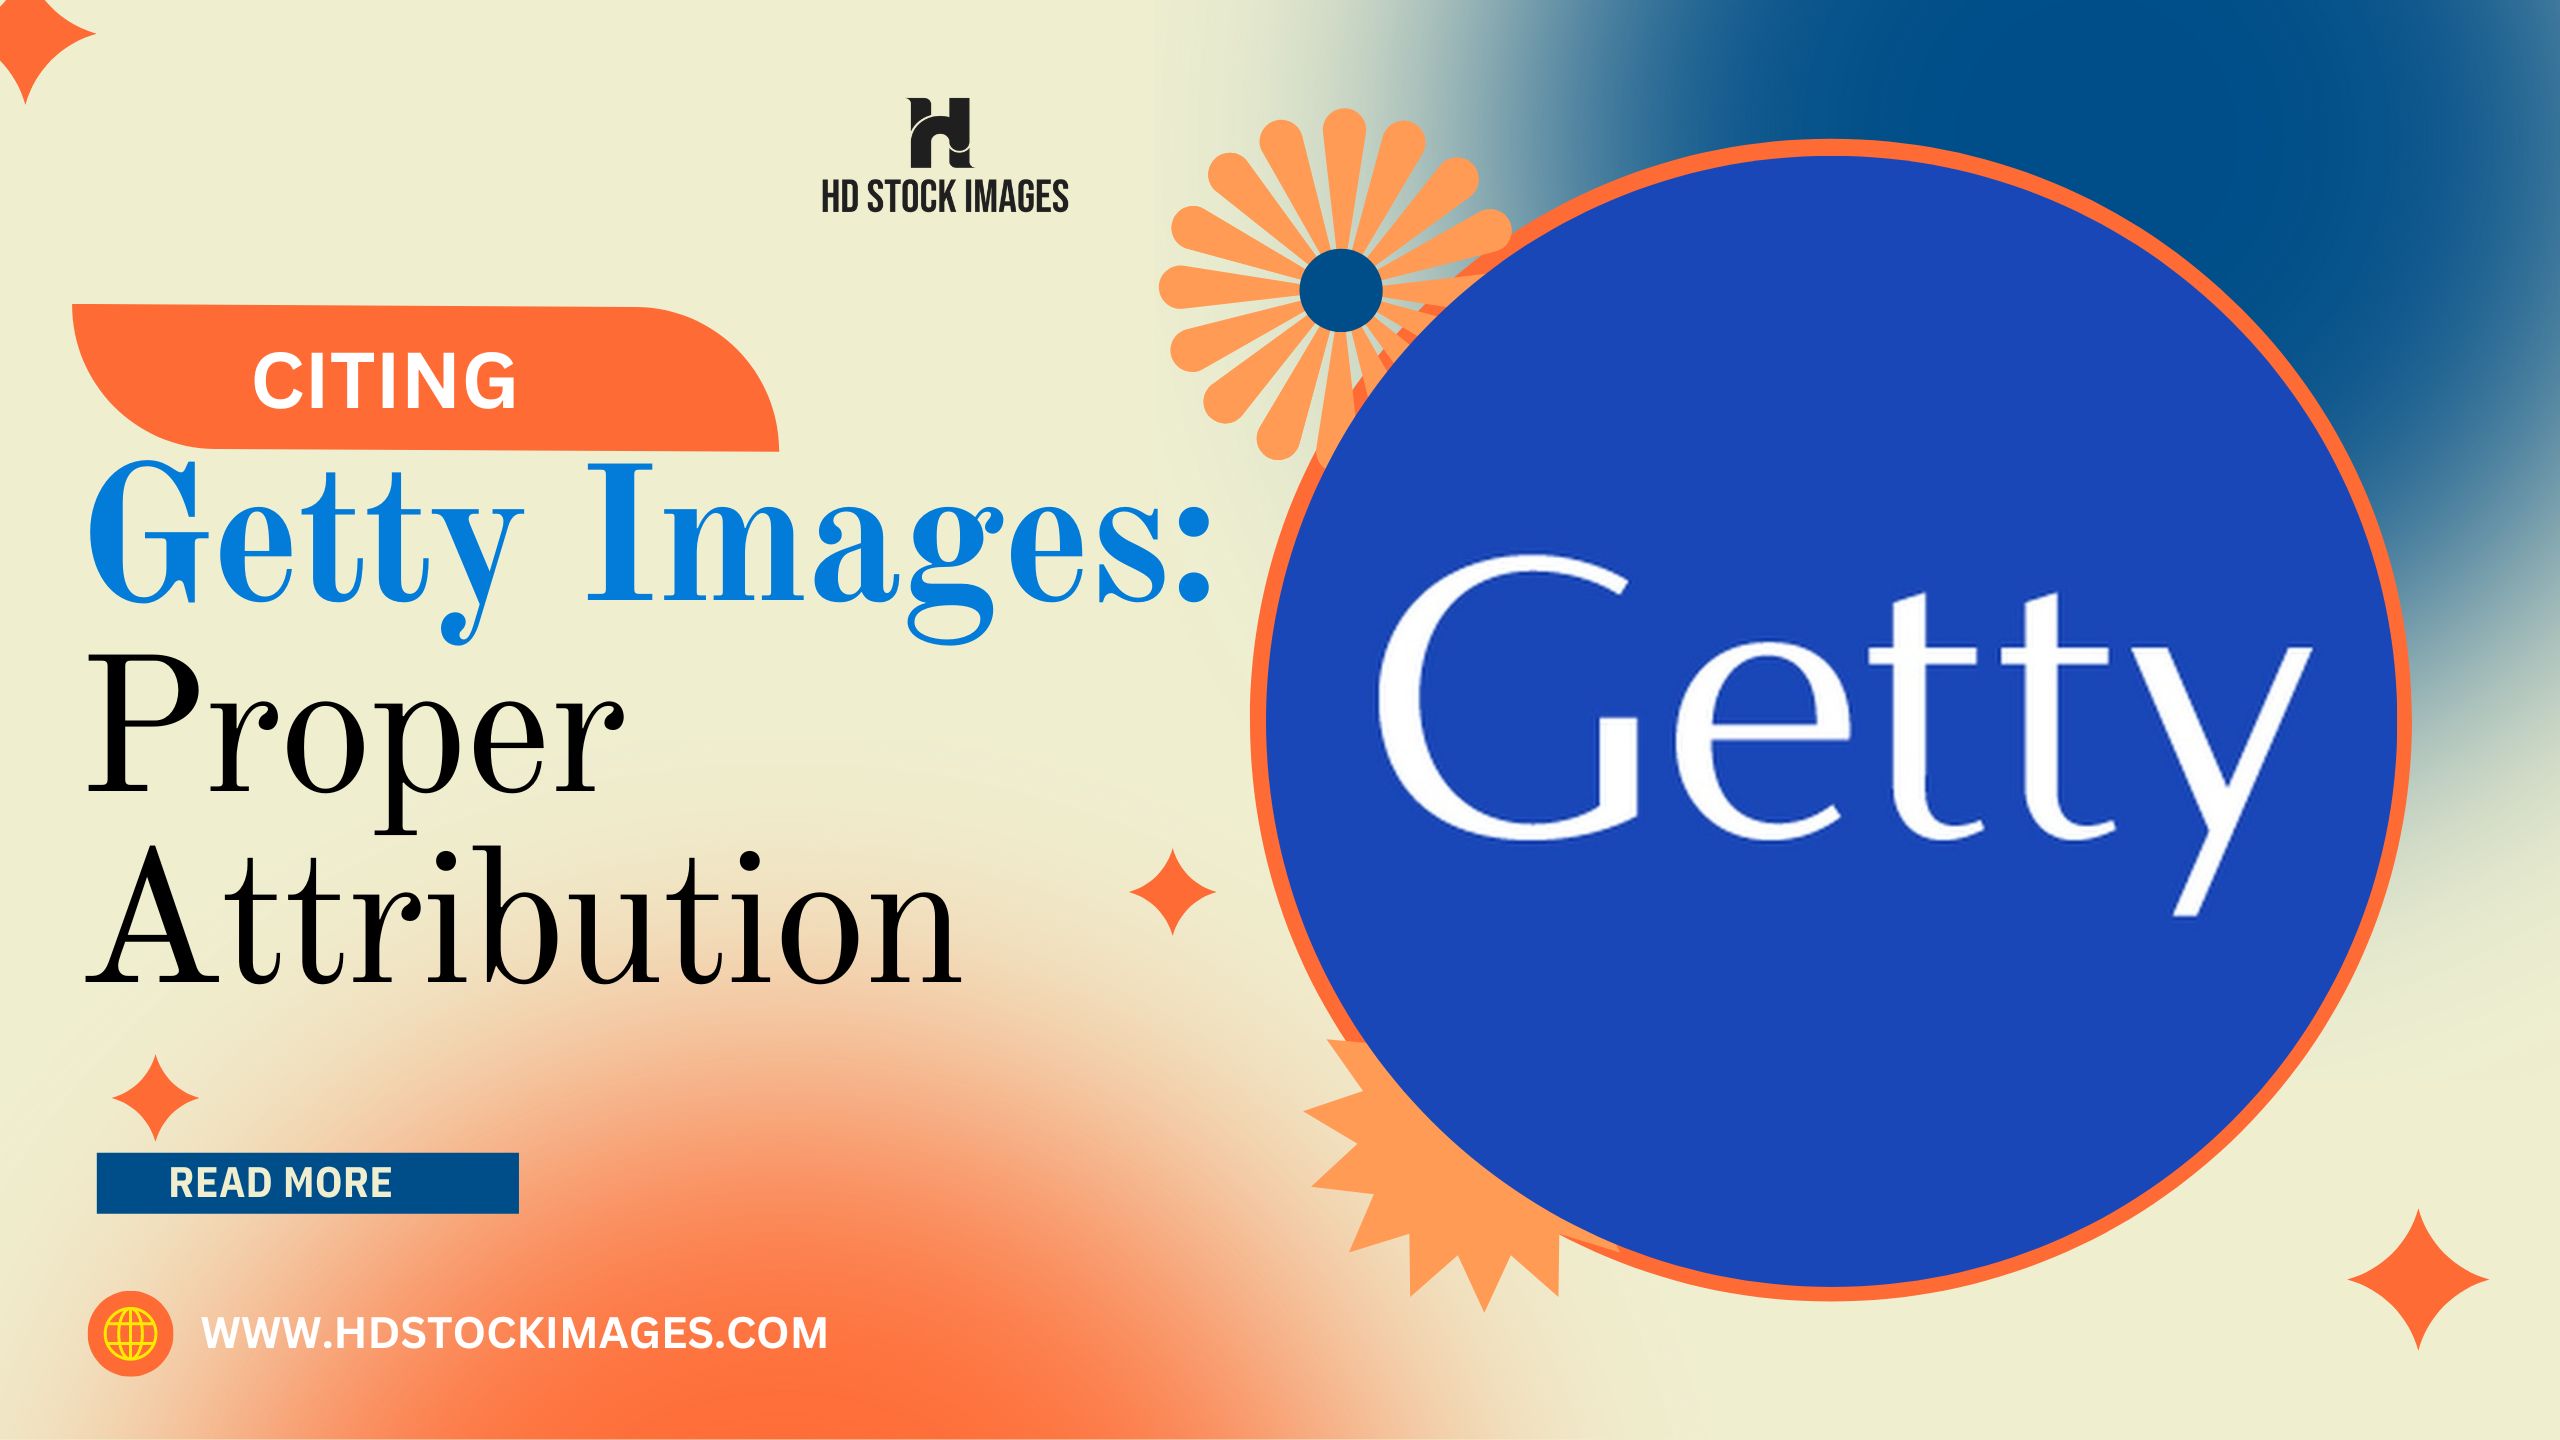 An image of Citing Getty Images: Proper Attribution for Academic and Creative Works